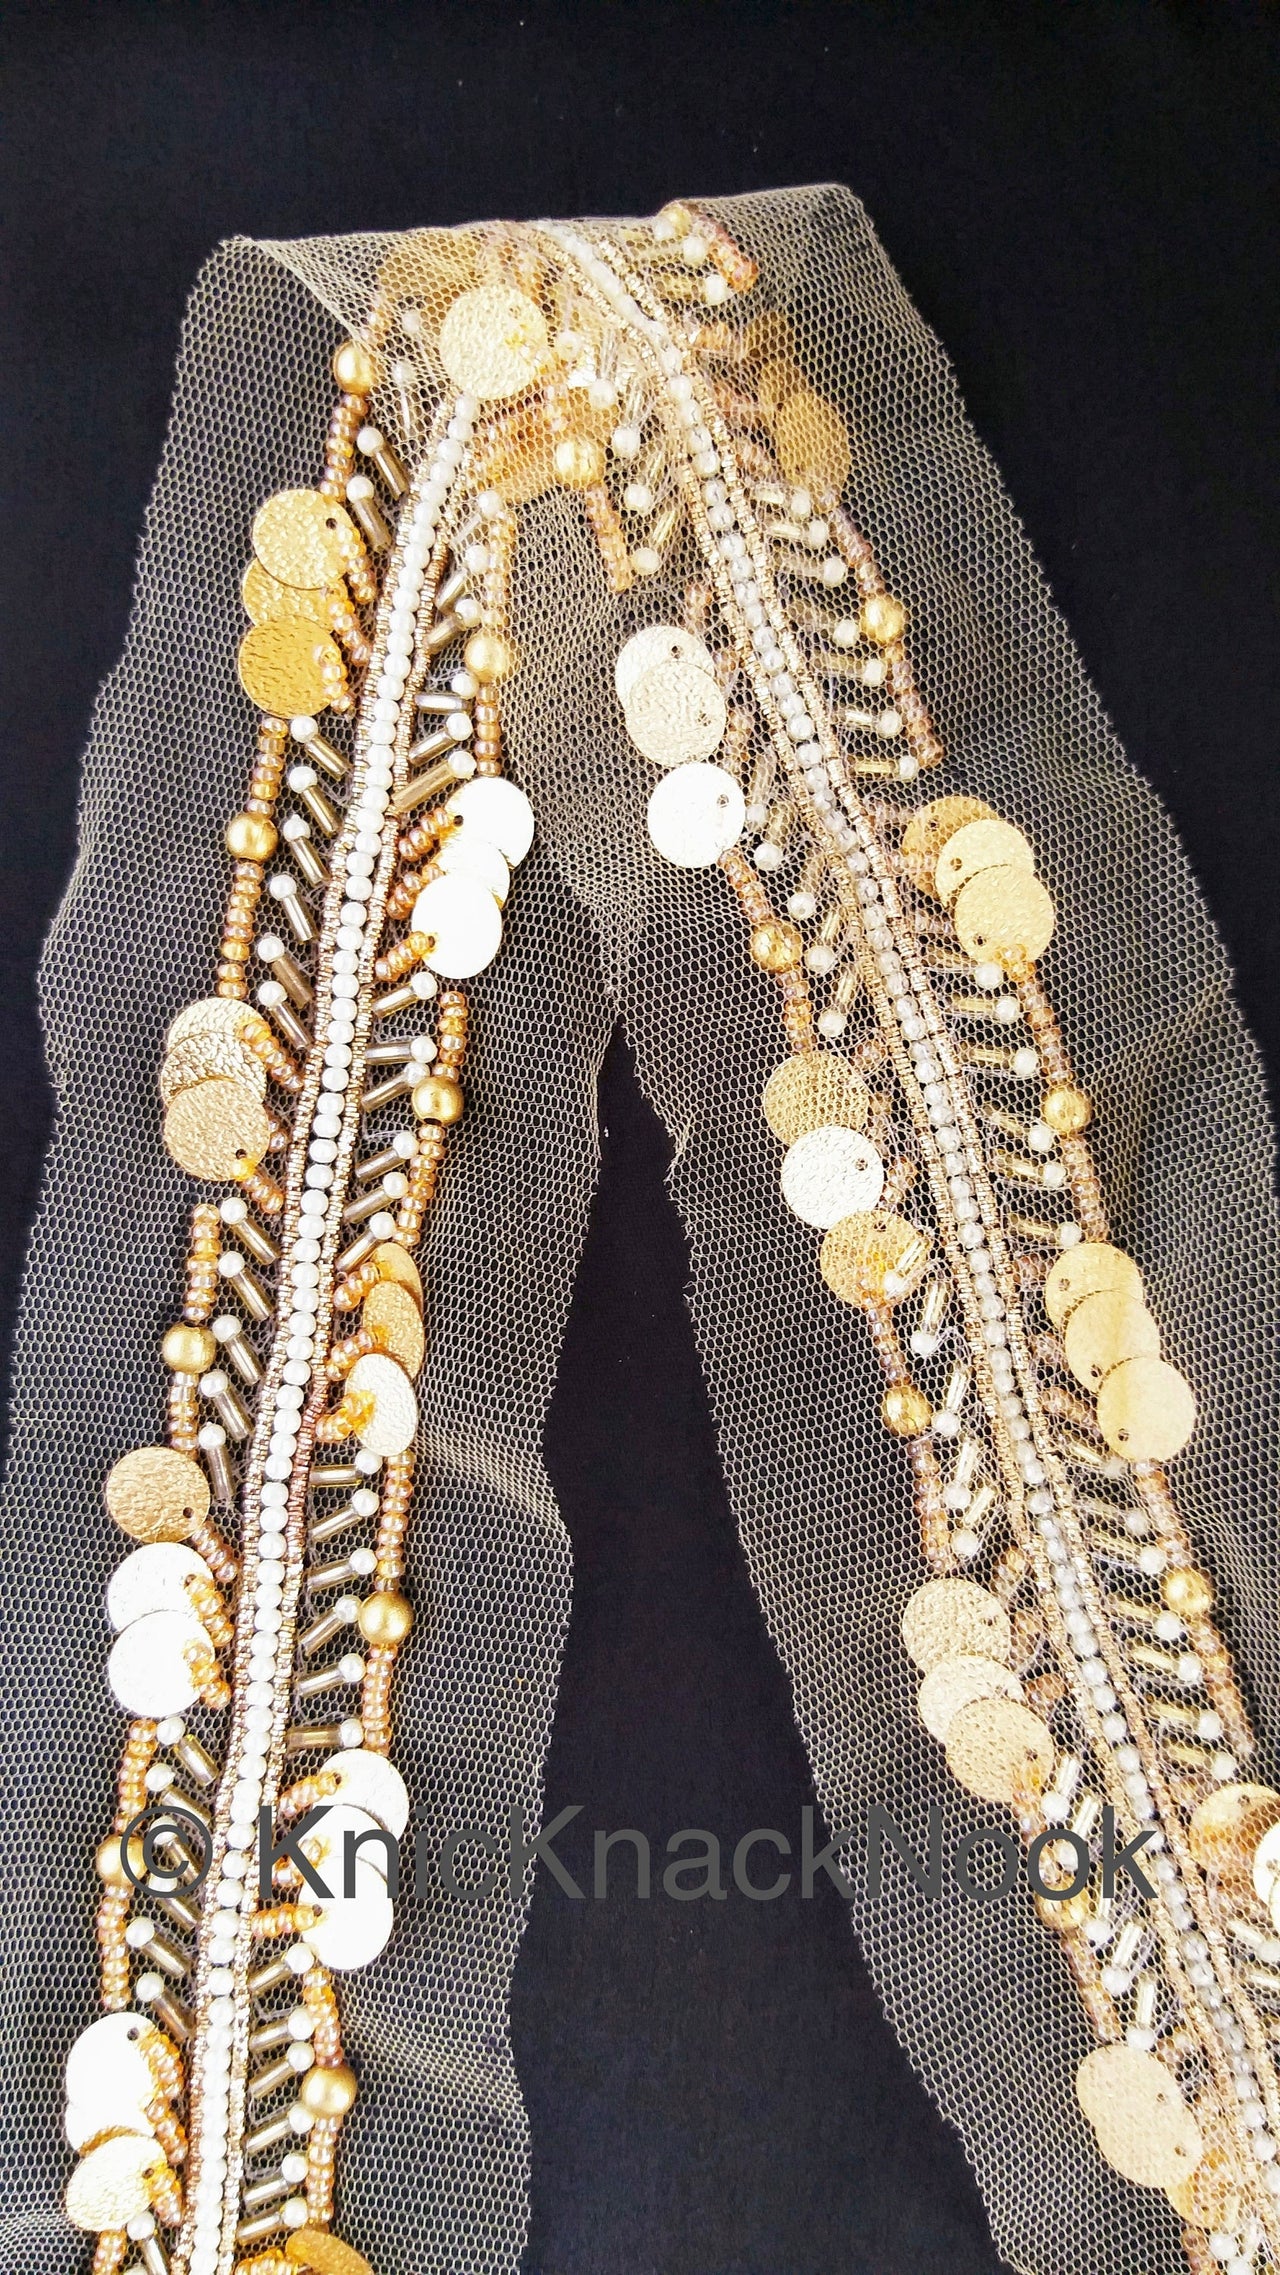 Beige Net Fabric Trim With Gold, White And Silver Beads, Gold Sequins Embellishments